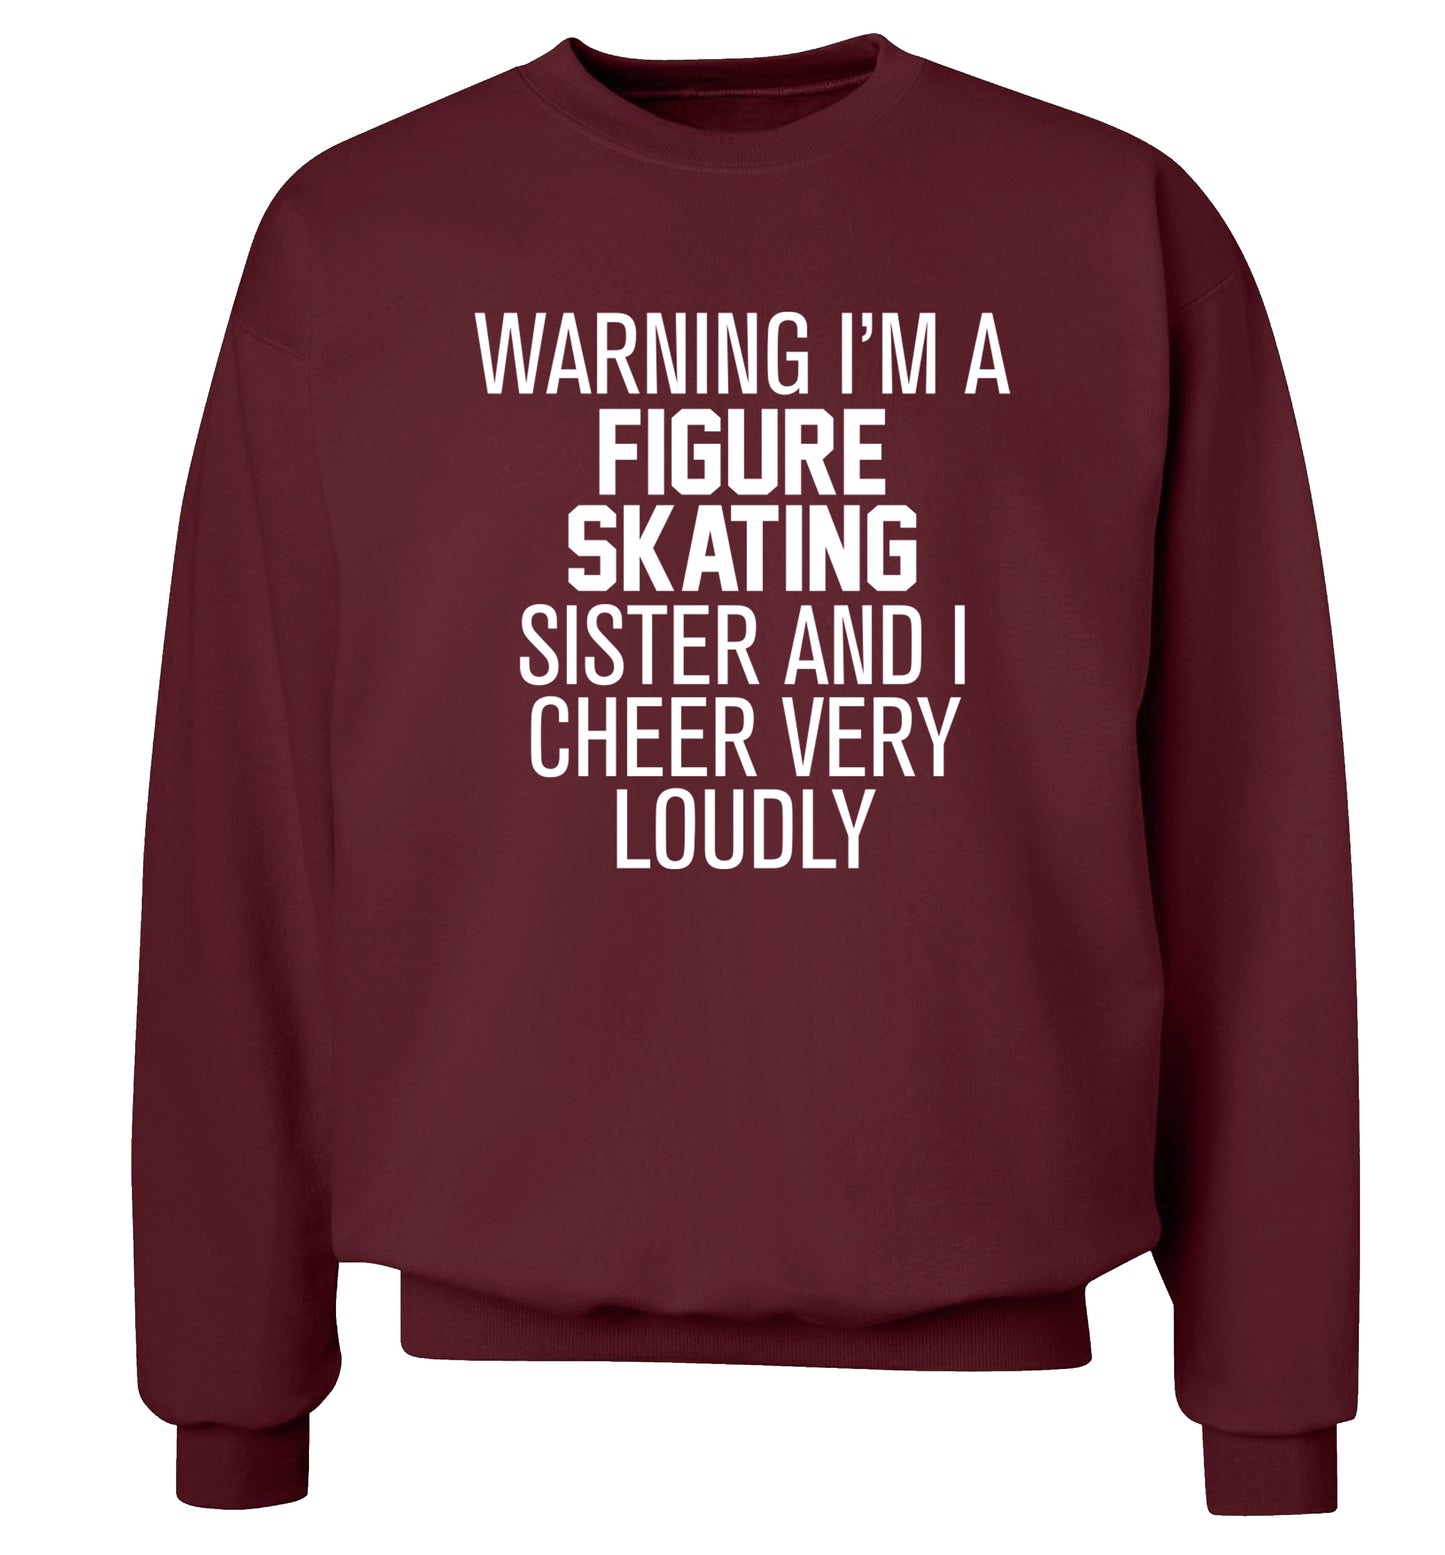 Warning I'm a figure skating sister and I cheer very loudly Adult's unisexmaroon Sweater 2XL